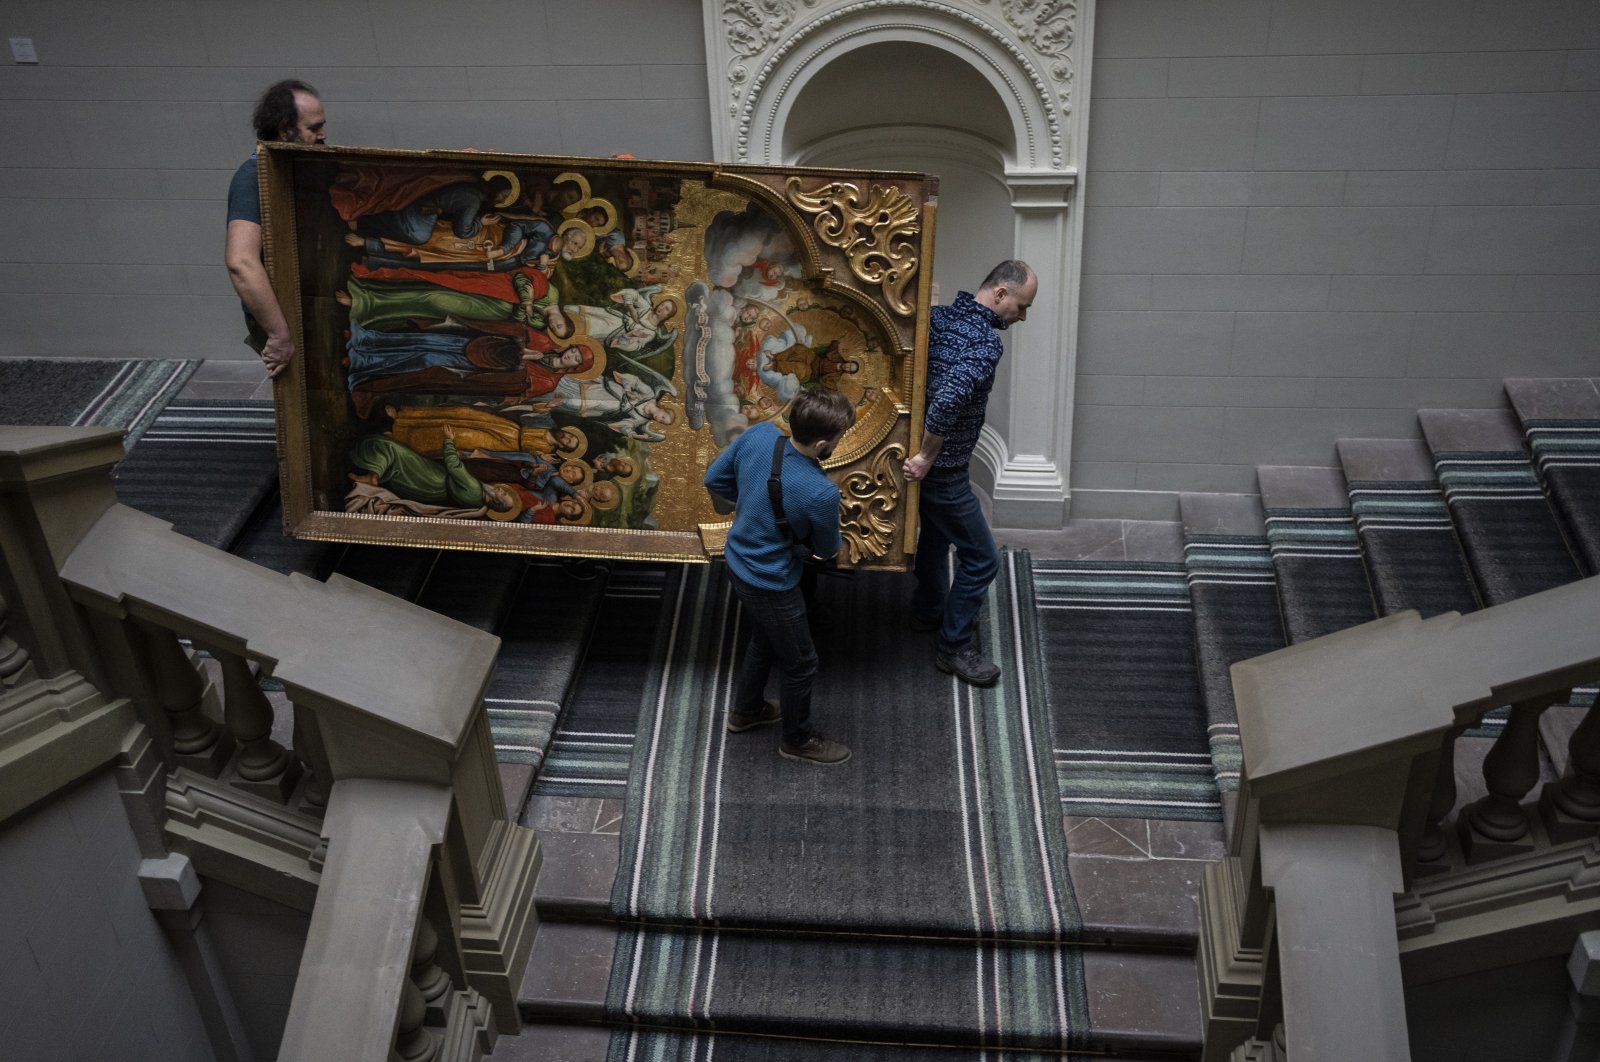 Workers move the Annunciation to the Blessed Virgin of the Bohorodchany Iconostasis in the Andrey Sheptytsky National Museum as part of safety preparations in the event of an attack in the western Ukrainian city of Lviv, Friday, March 4, 2022. (AP)